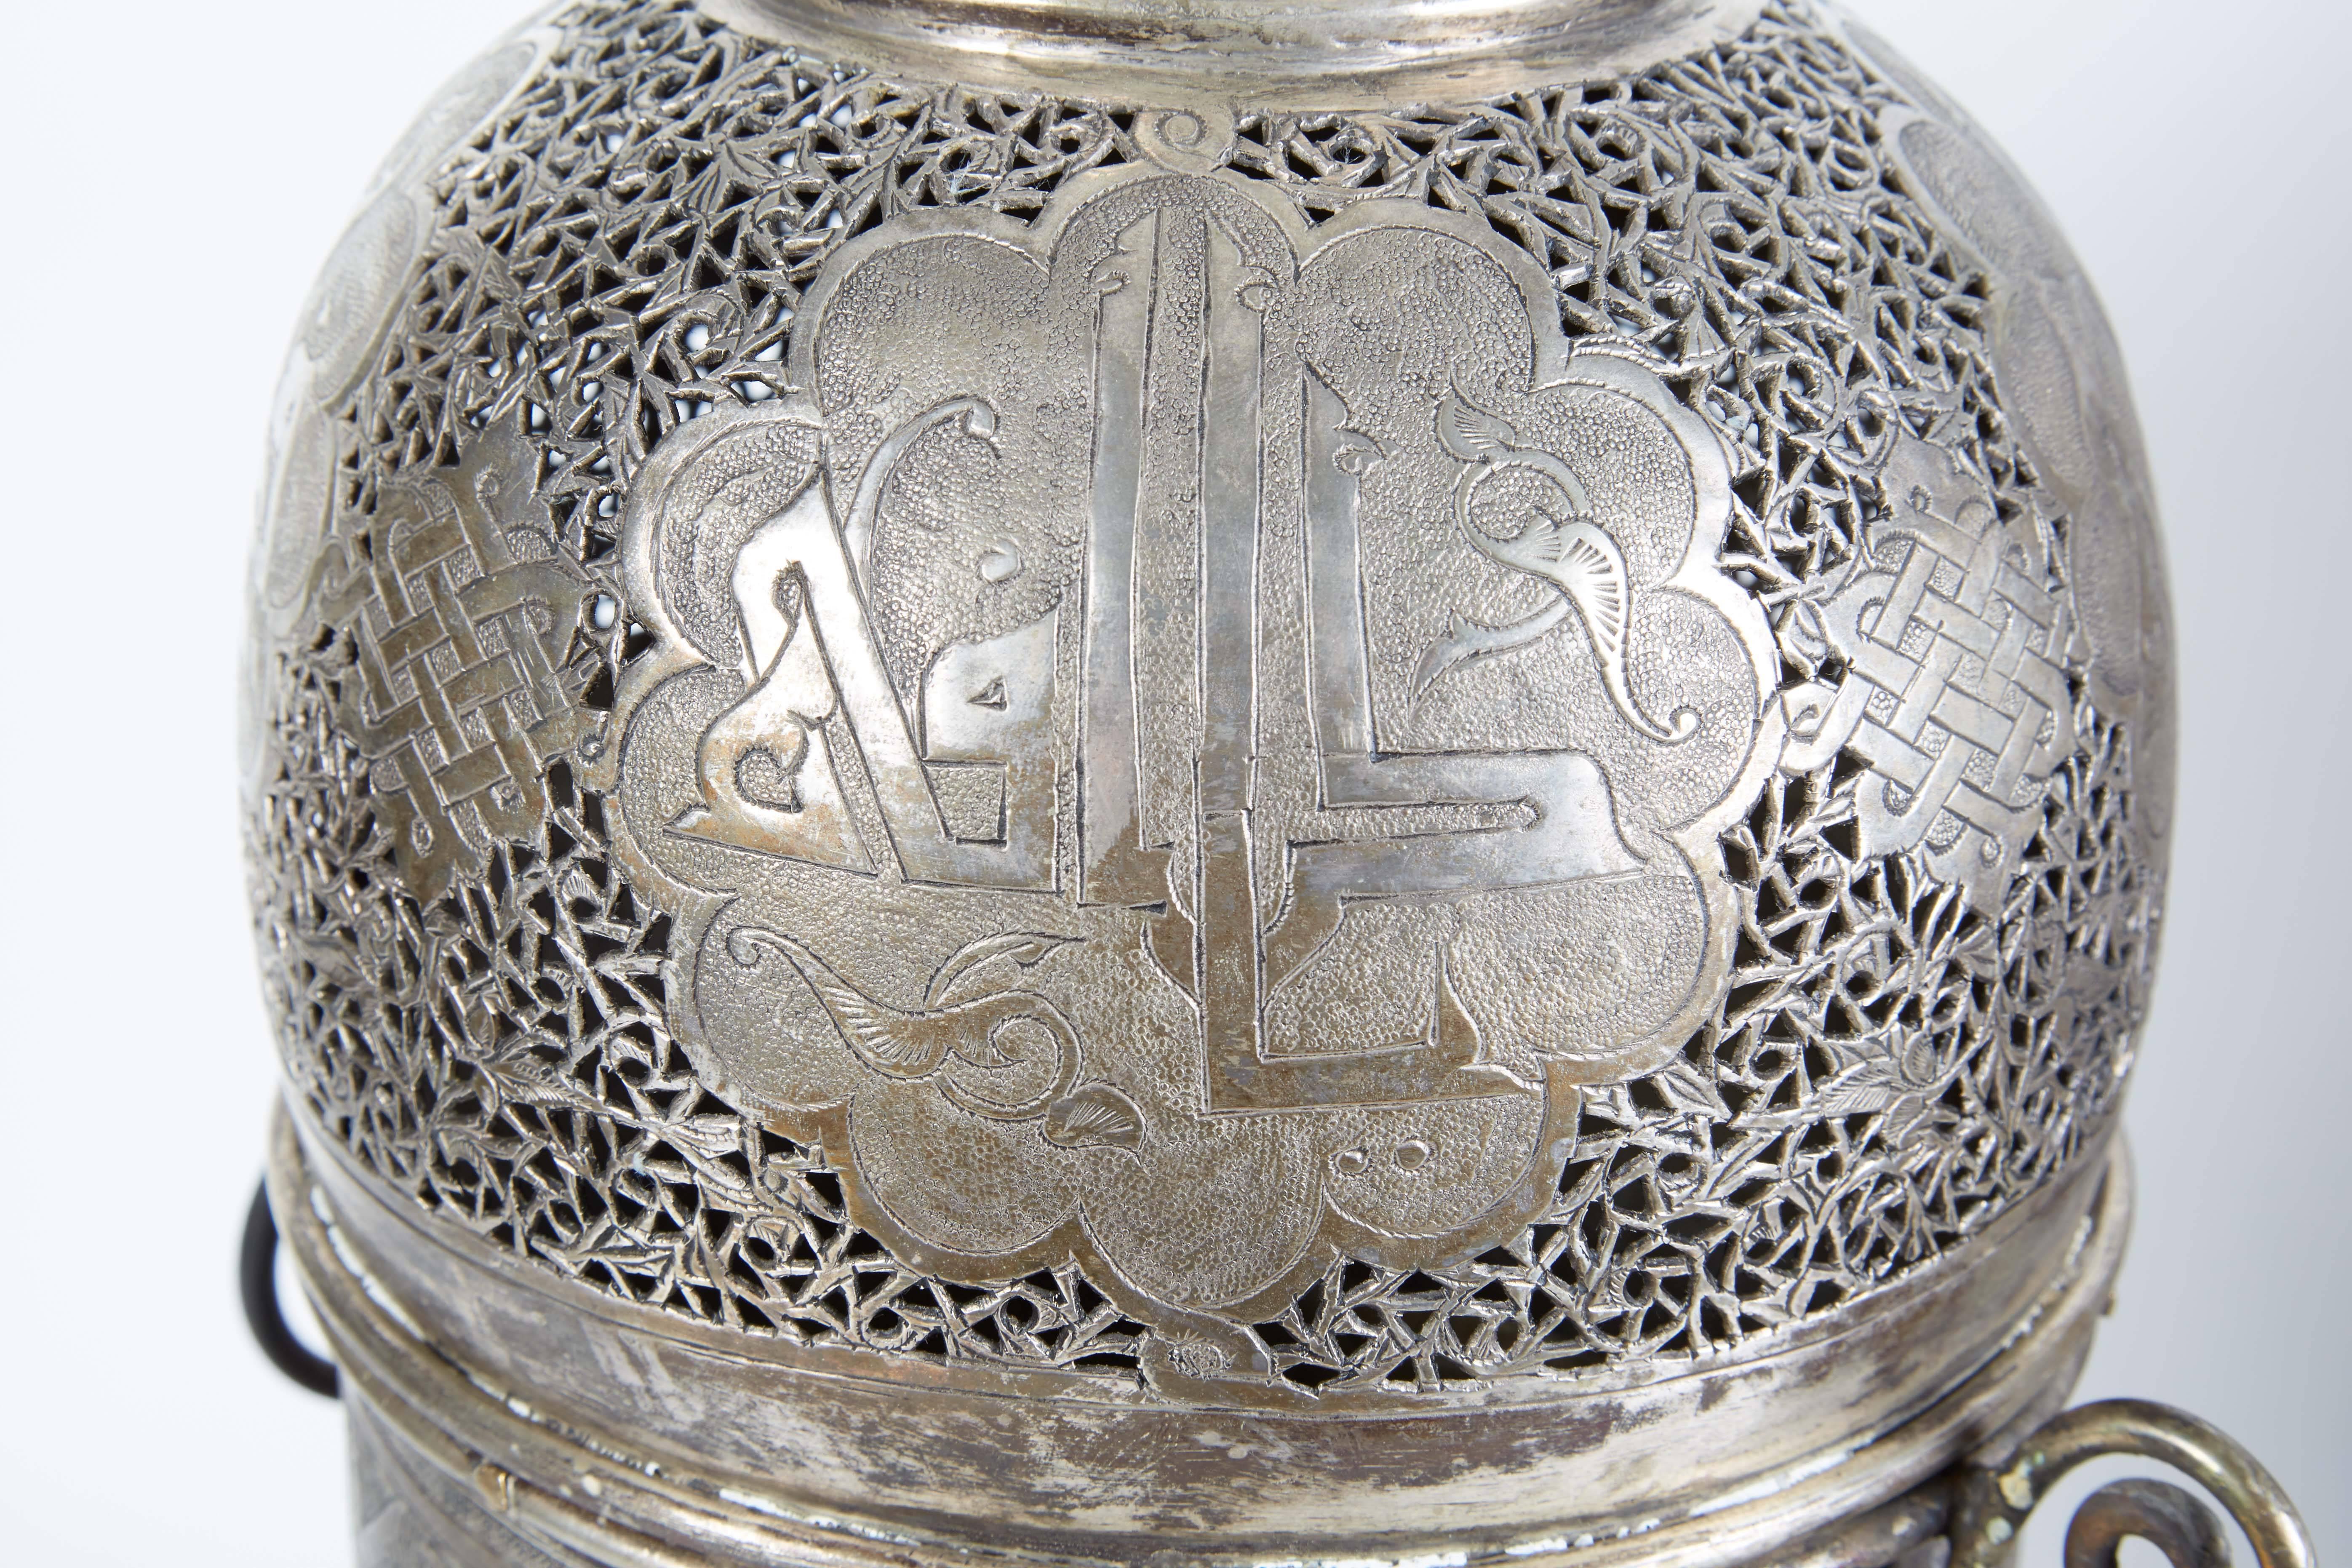 Pair of Antique Islamic Persian Silver Incense Burners with Arabic Calligraphy 1